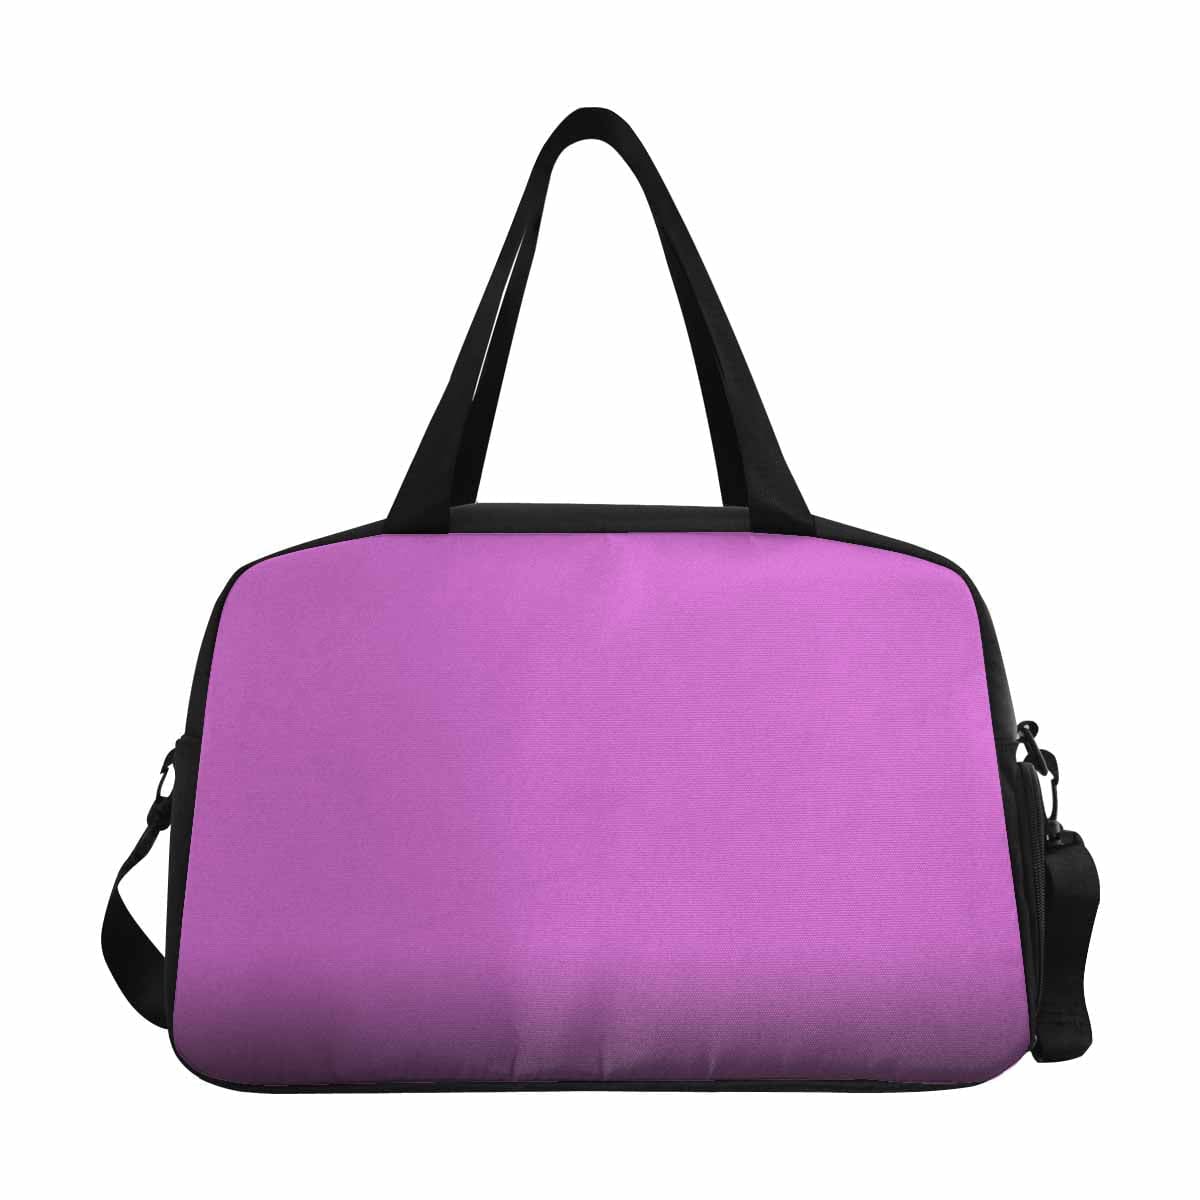 Orchid Purple Tote And Crossbody Travel Bag - Bags | Travel Bags | Crossbody